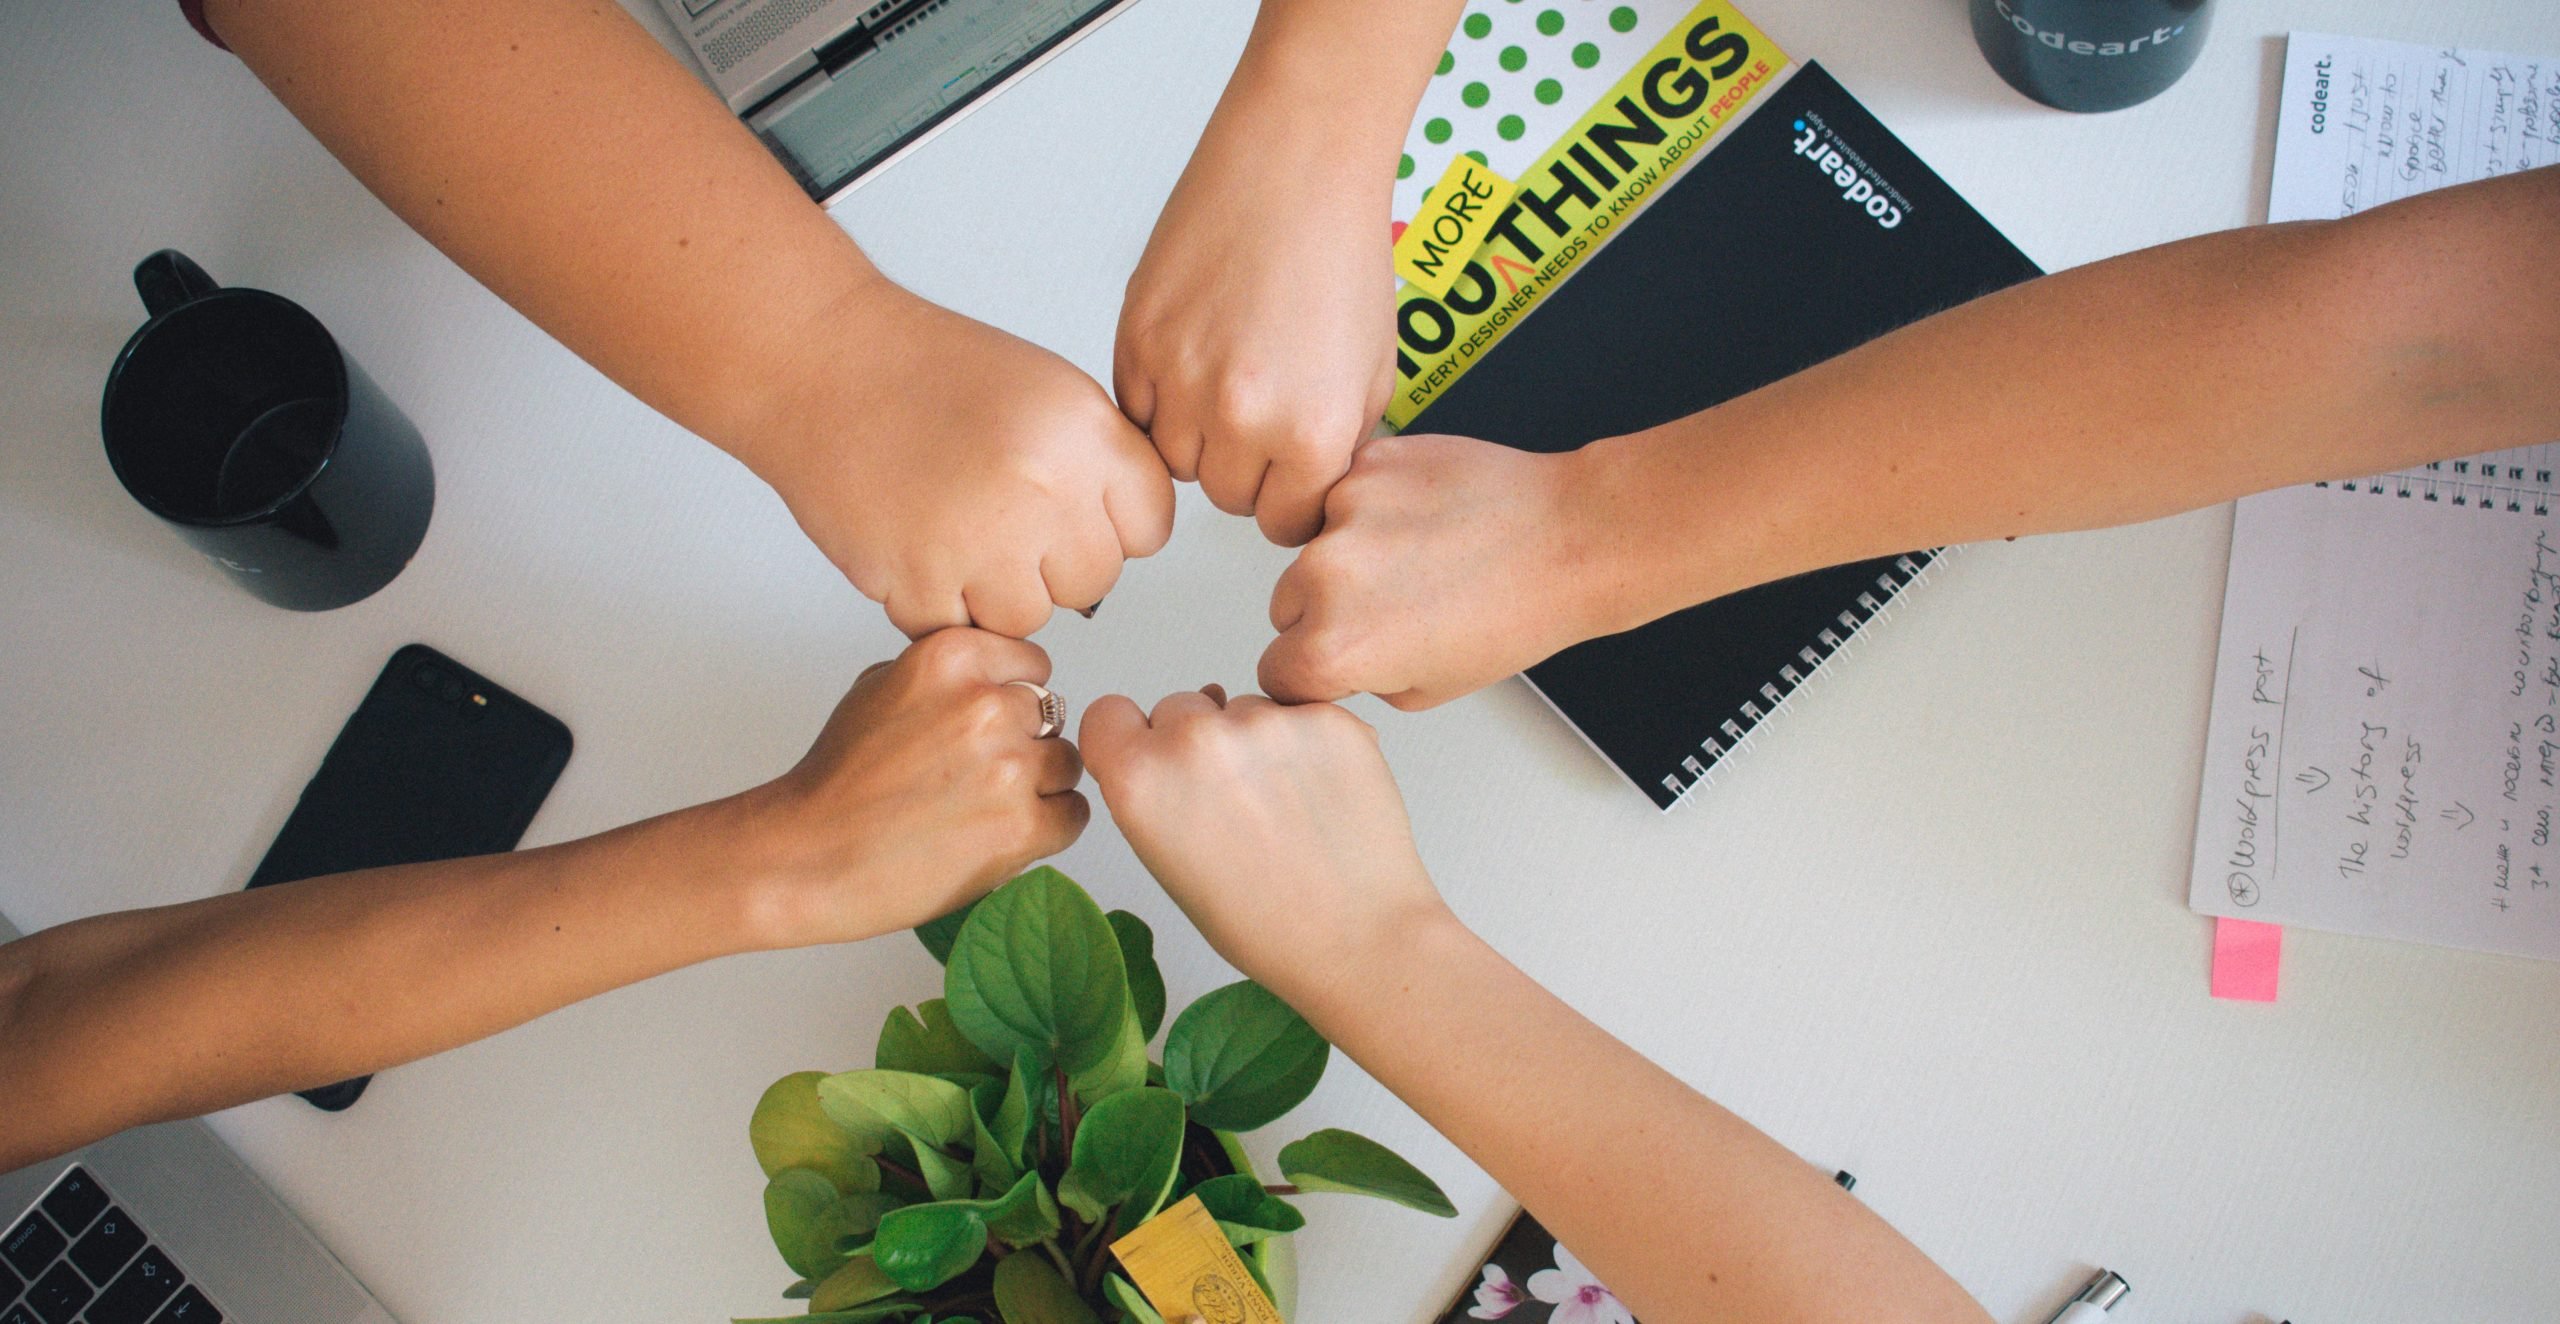 Five closed hands doing a group fist bump above a desk